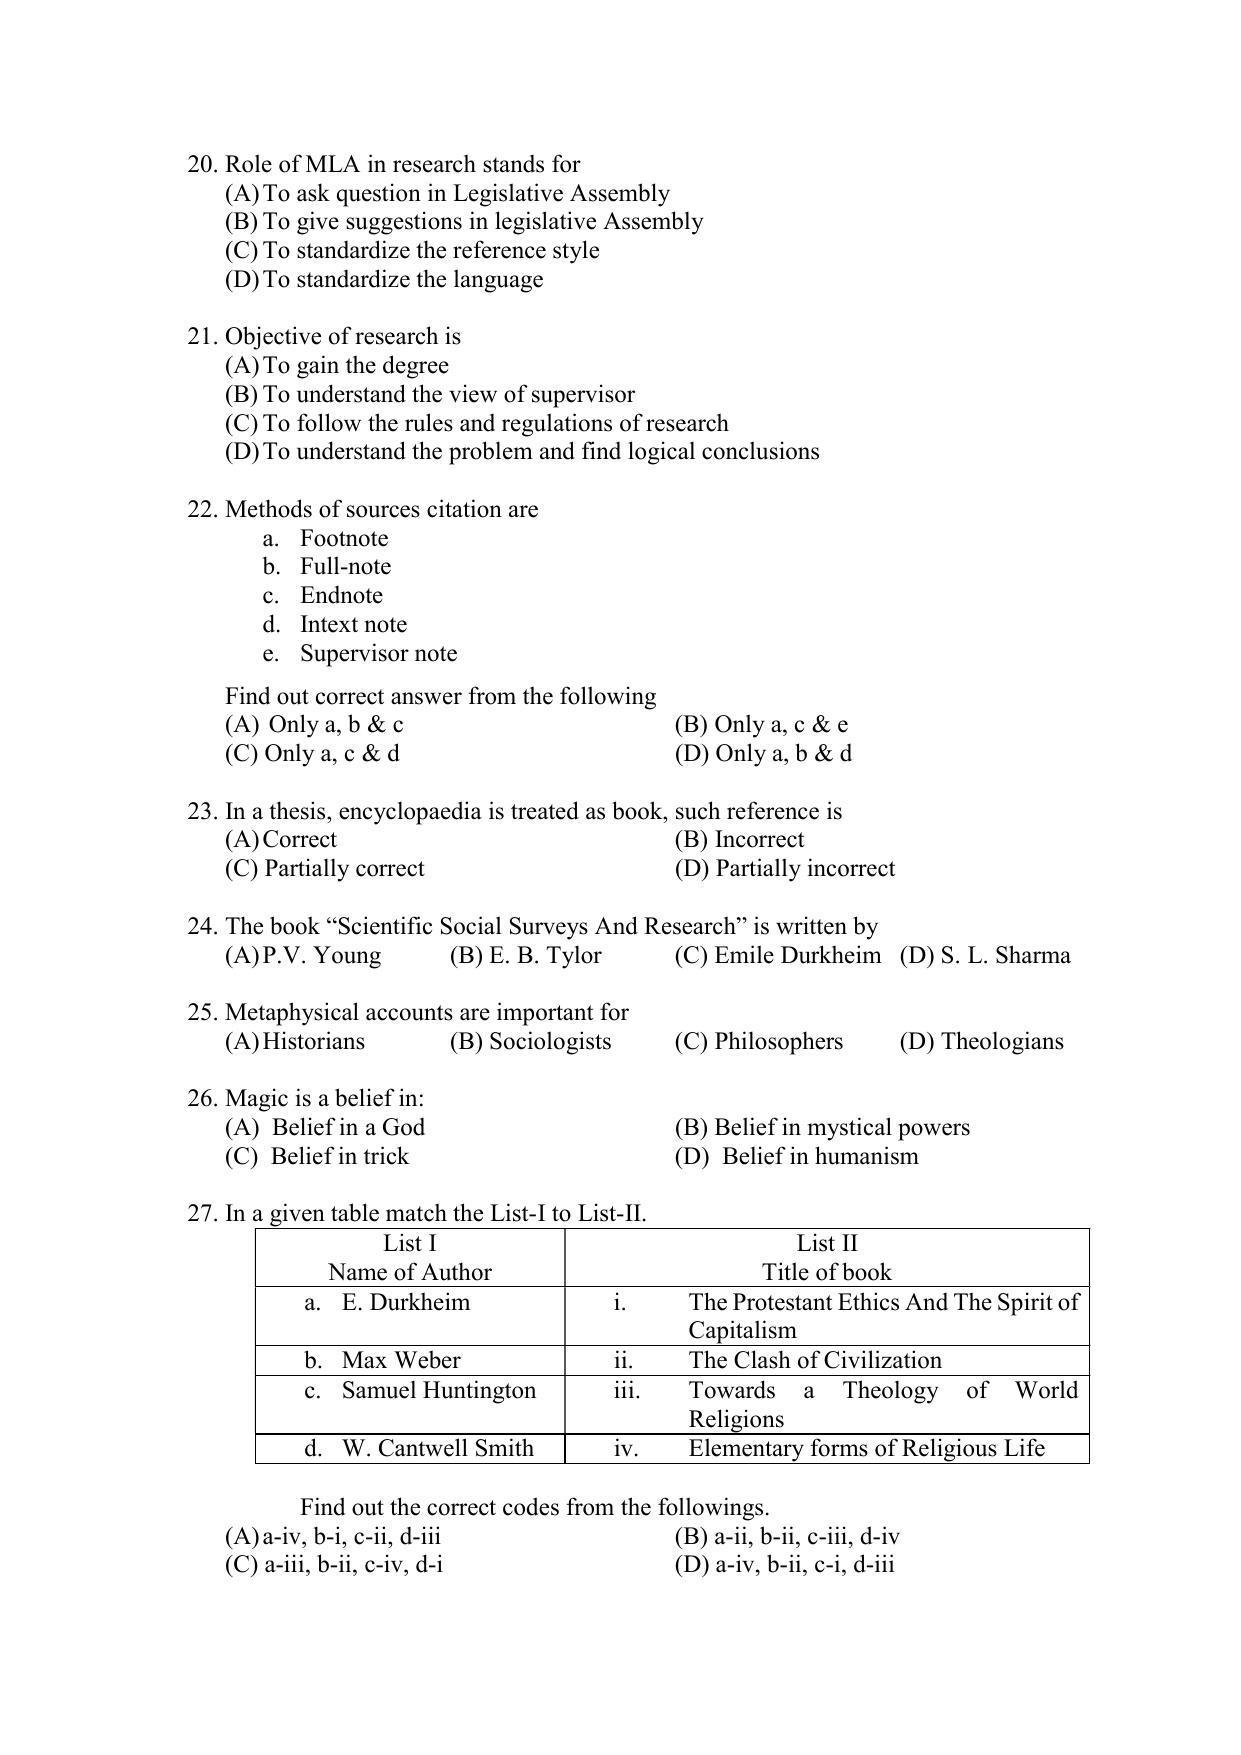 PU MPET Ancient Indian History & Archeology 2022 Question Papers - Page 55